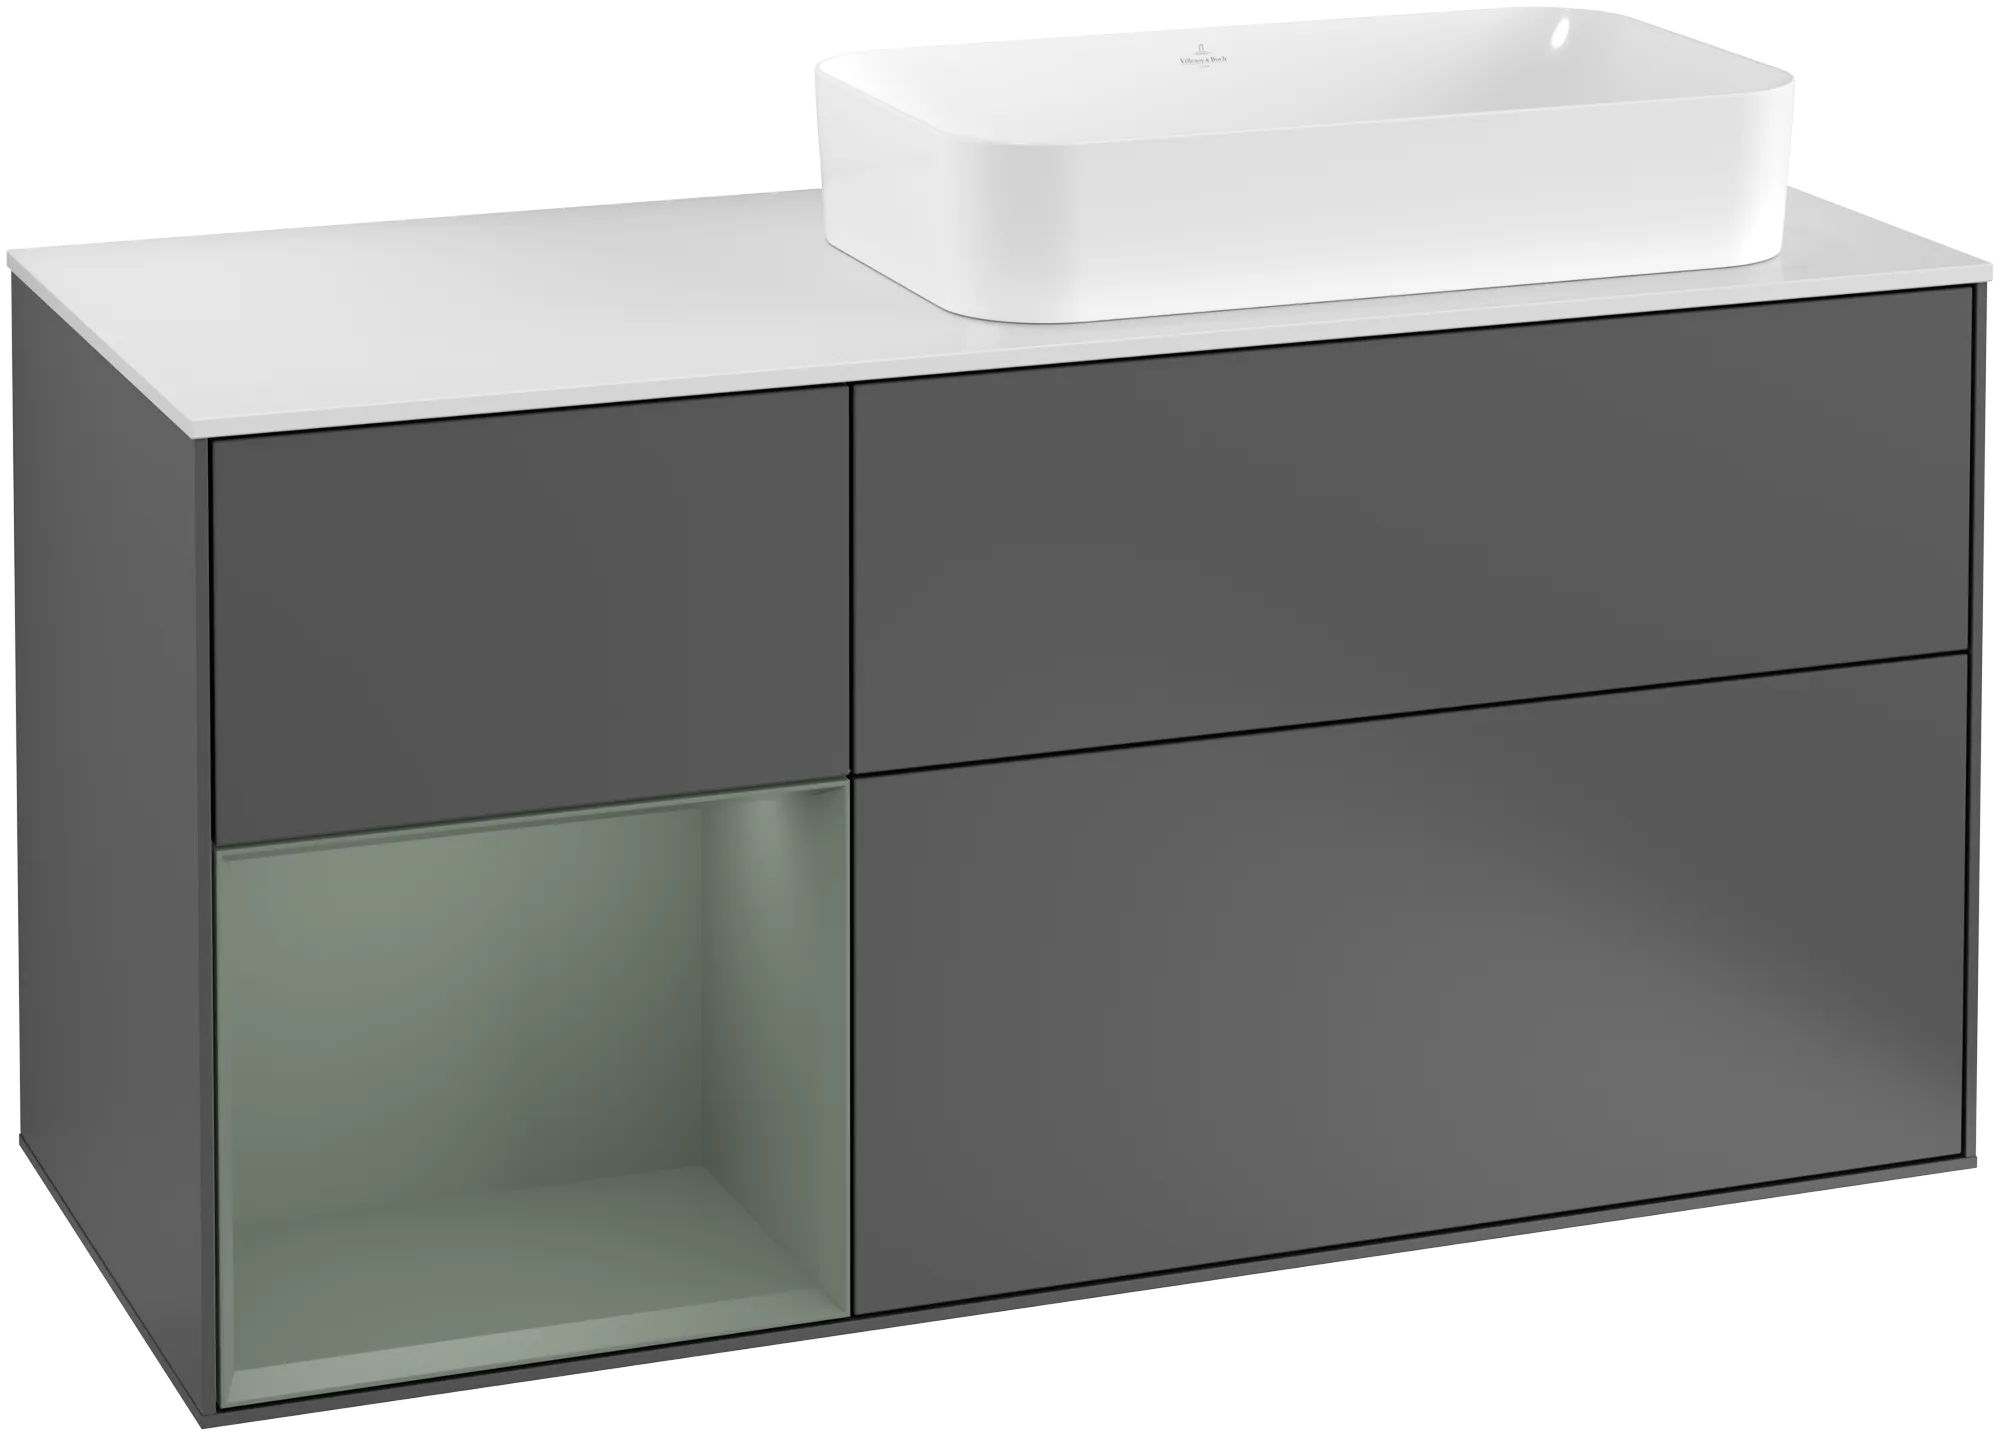 Obrázek VILLEROY BOCH Finion Vanity unit, with lighting, 3 pull-out compartments, 1200 x 603 x 501 mm, Anthracite Matt Lacquer / Olive Matt Lacquer / Glass White Matt #G271GMGK